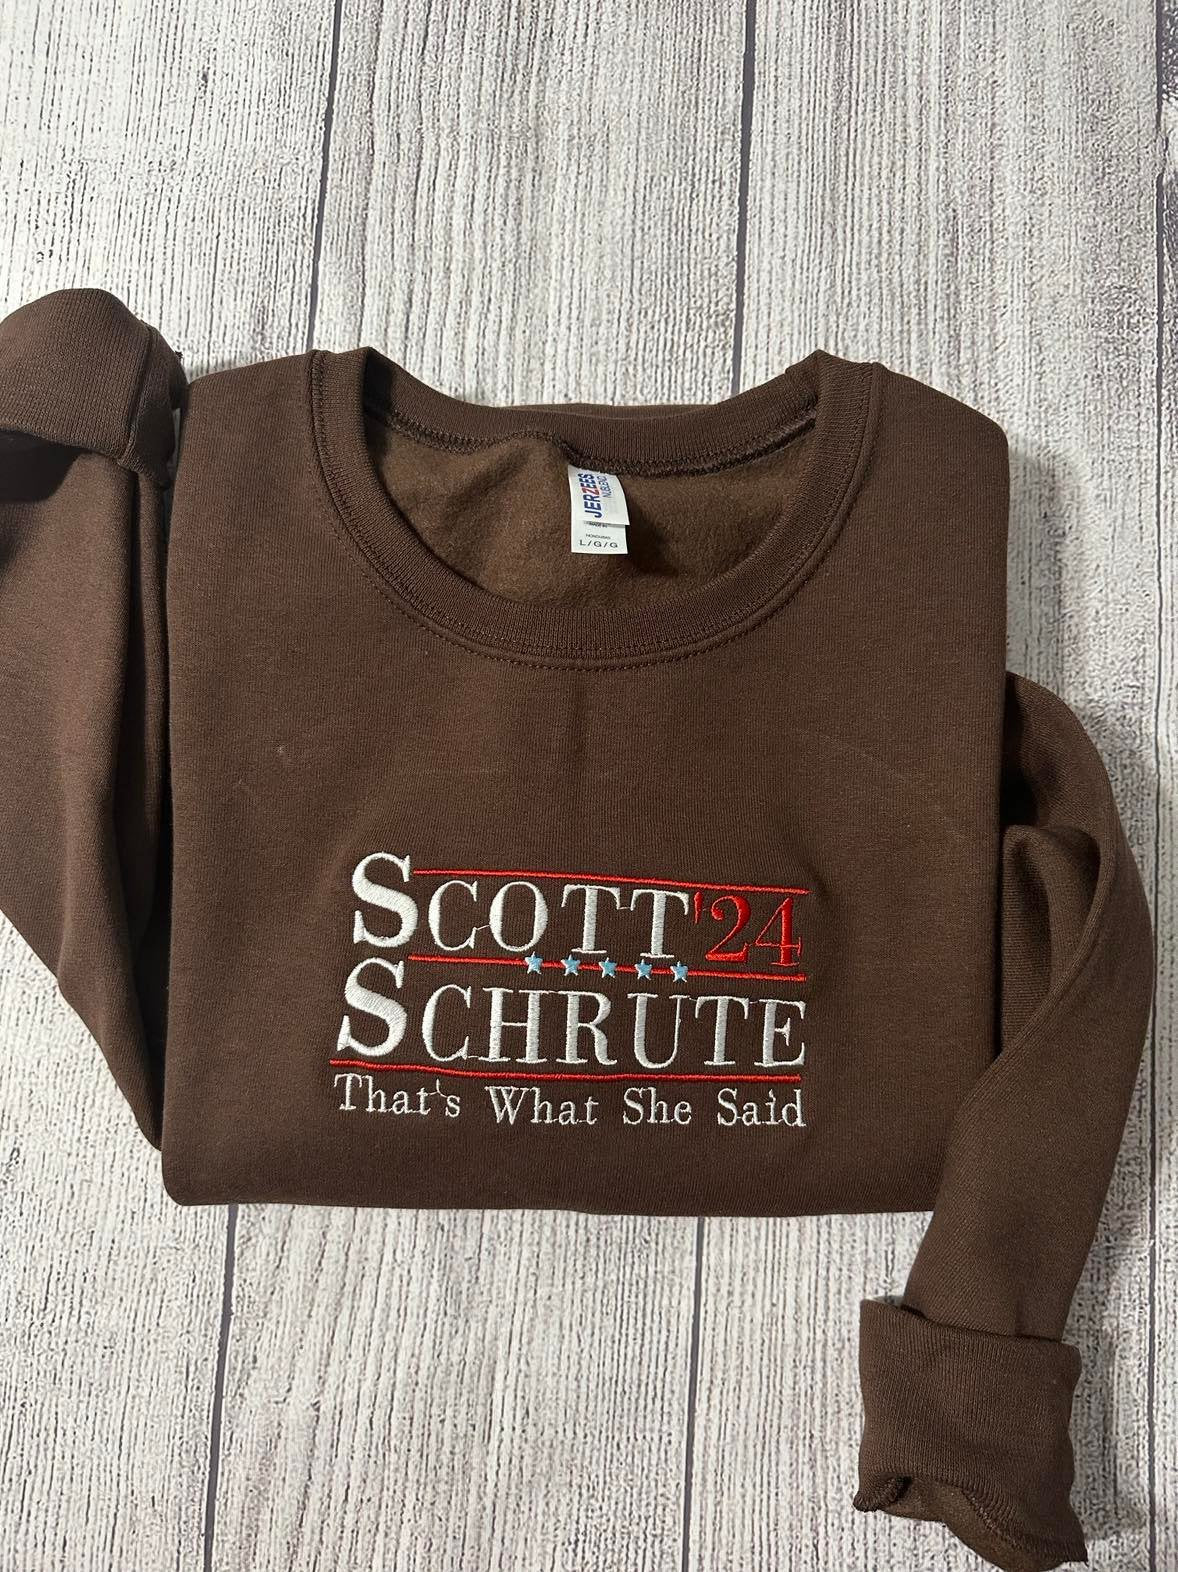 Schrute Farms Embroidered sweatshirt; vintage Scott 24 embroidered crewneck; trending sweatshirts, gift for sweater; the office sweatshirt - MrEmbroideryGifts